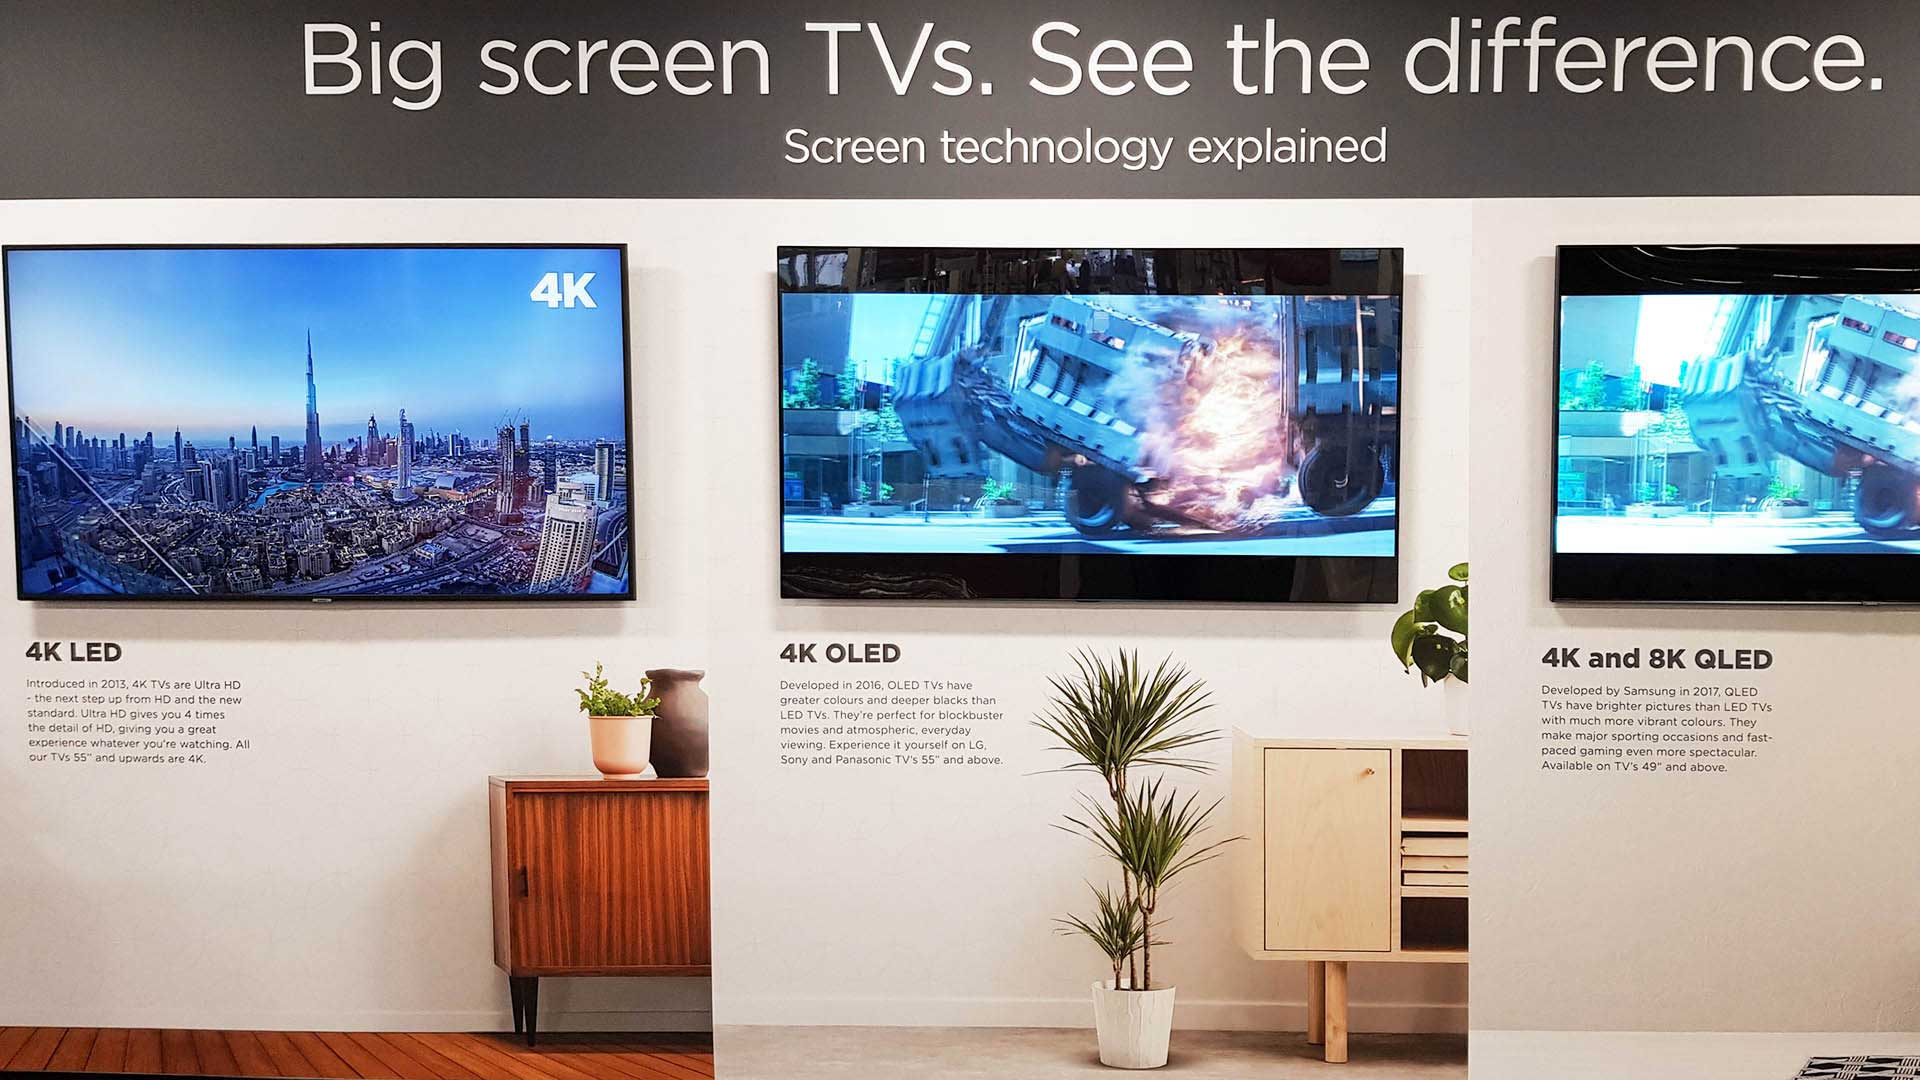 Compare SUHD & UHD Televisions, LG or Samsung, Which would you buy?